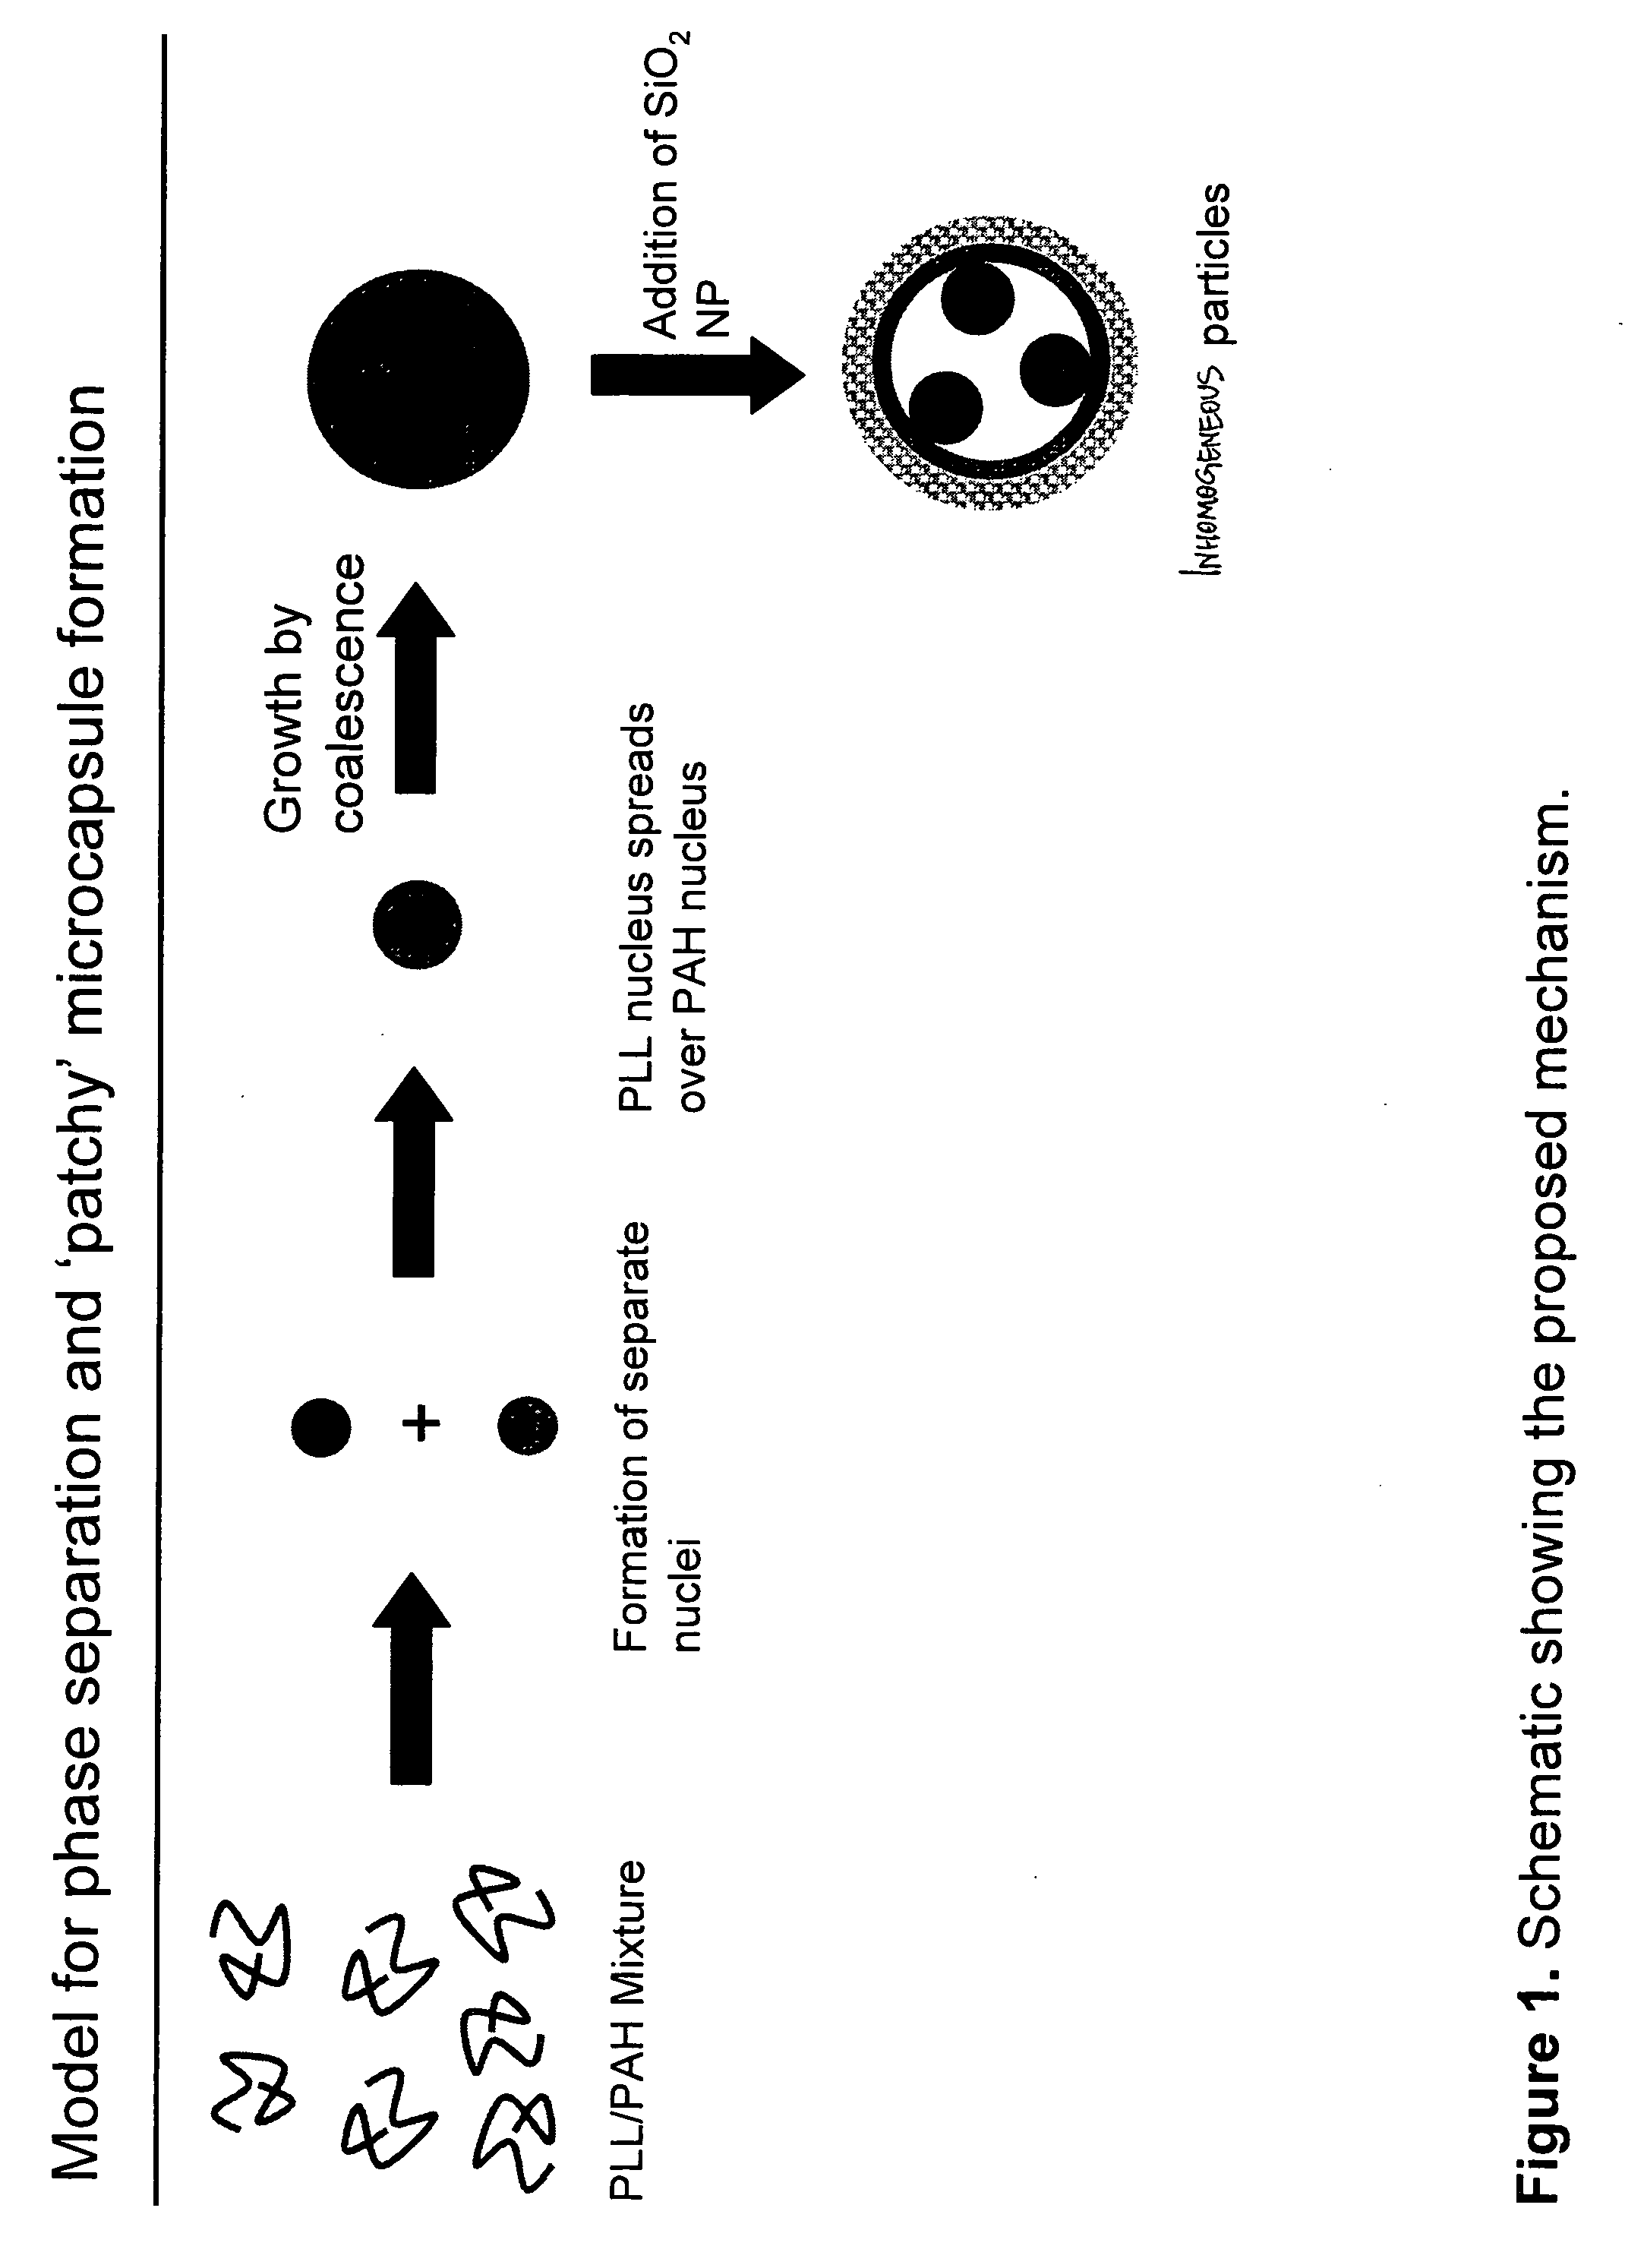 Method to fabricate inhomogeneous particles